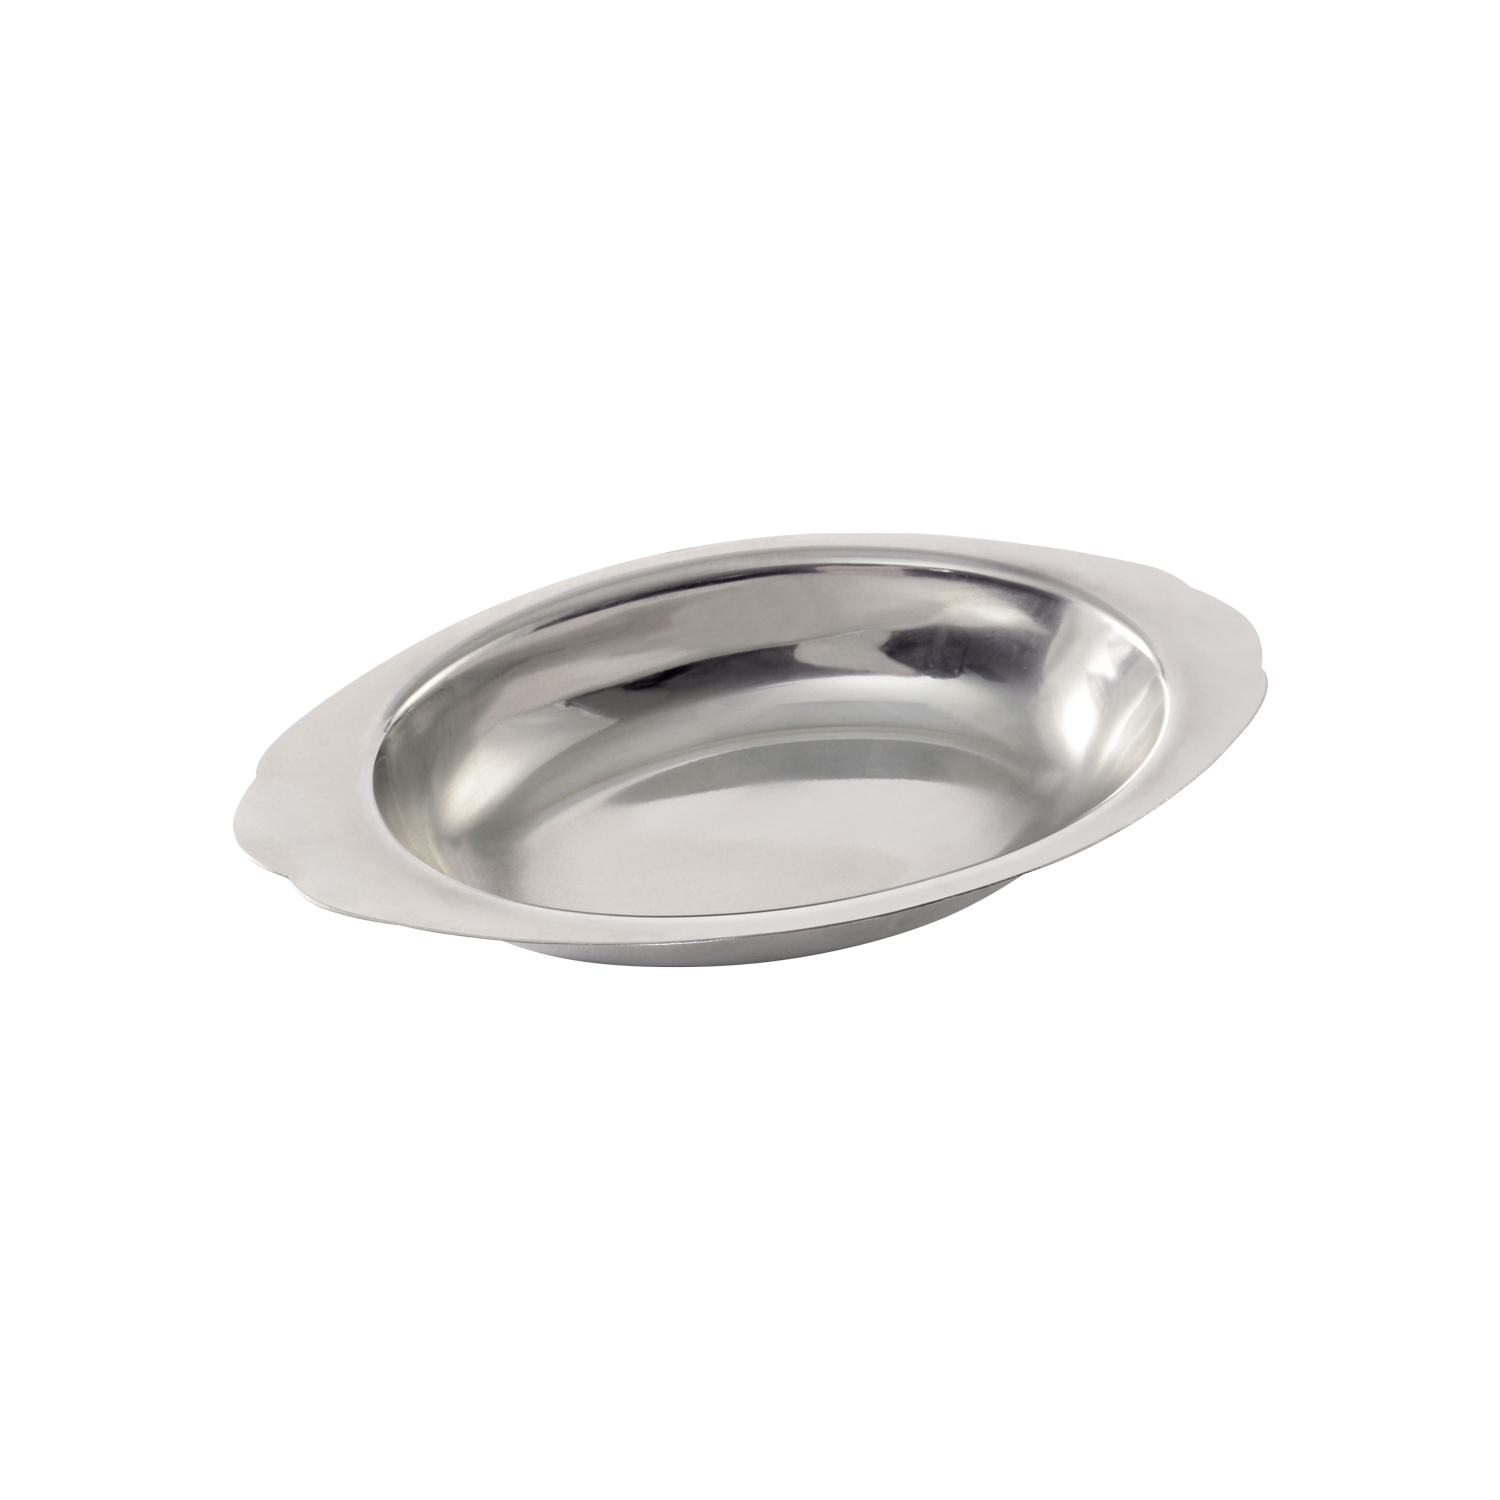 CAC China AUDS-8 Stainless Steel Oval Au Gratin Dish 8 oz.